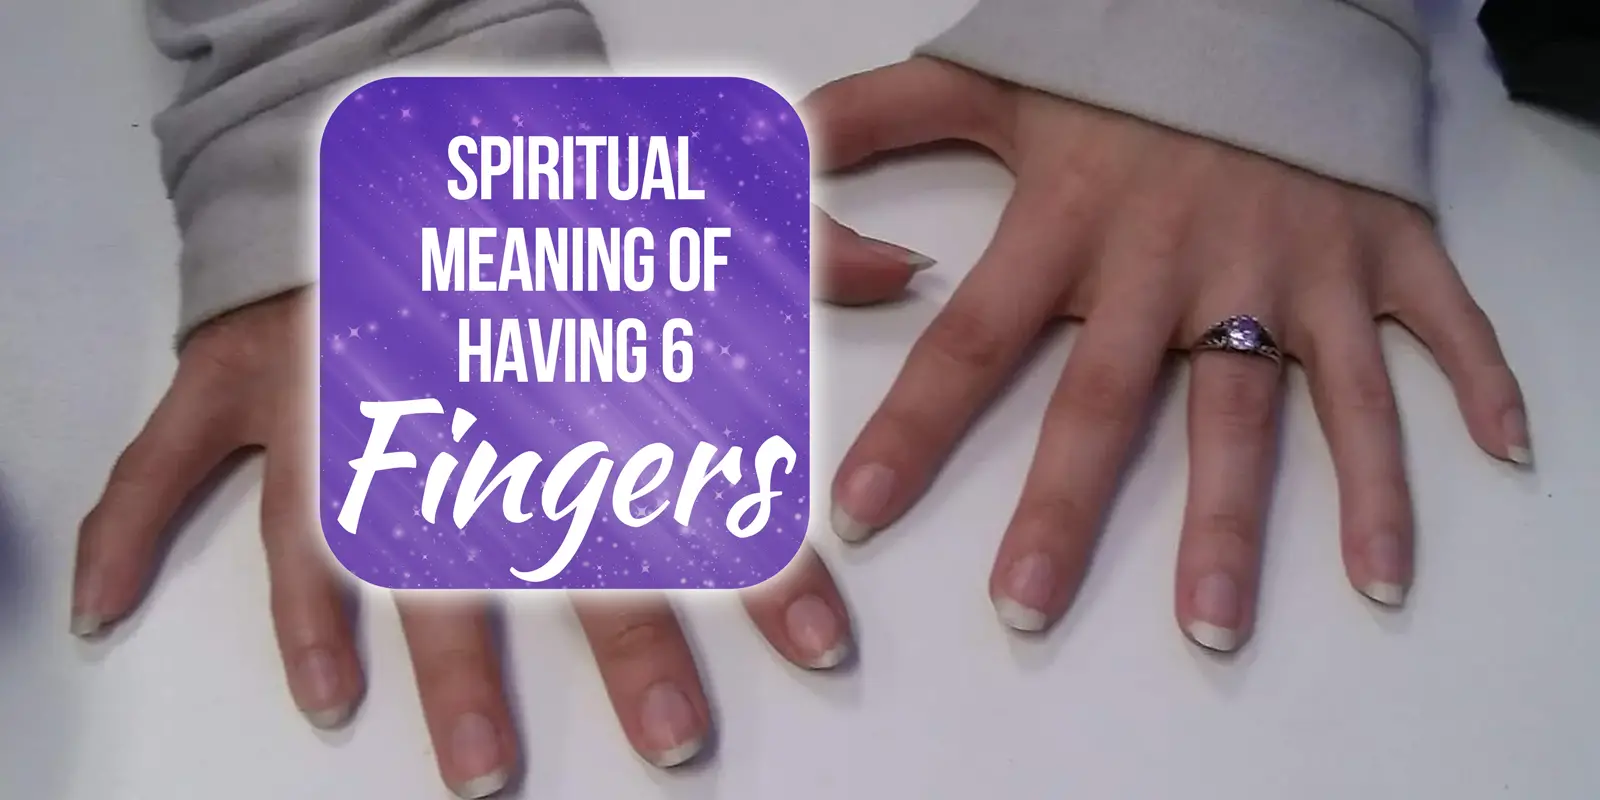 The Fascinating Biblical Meaning of Six Fingers